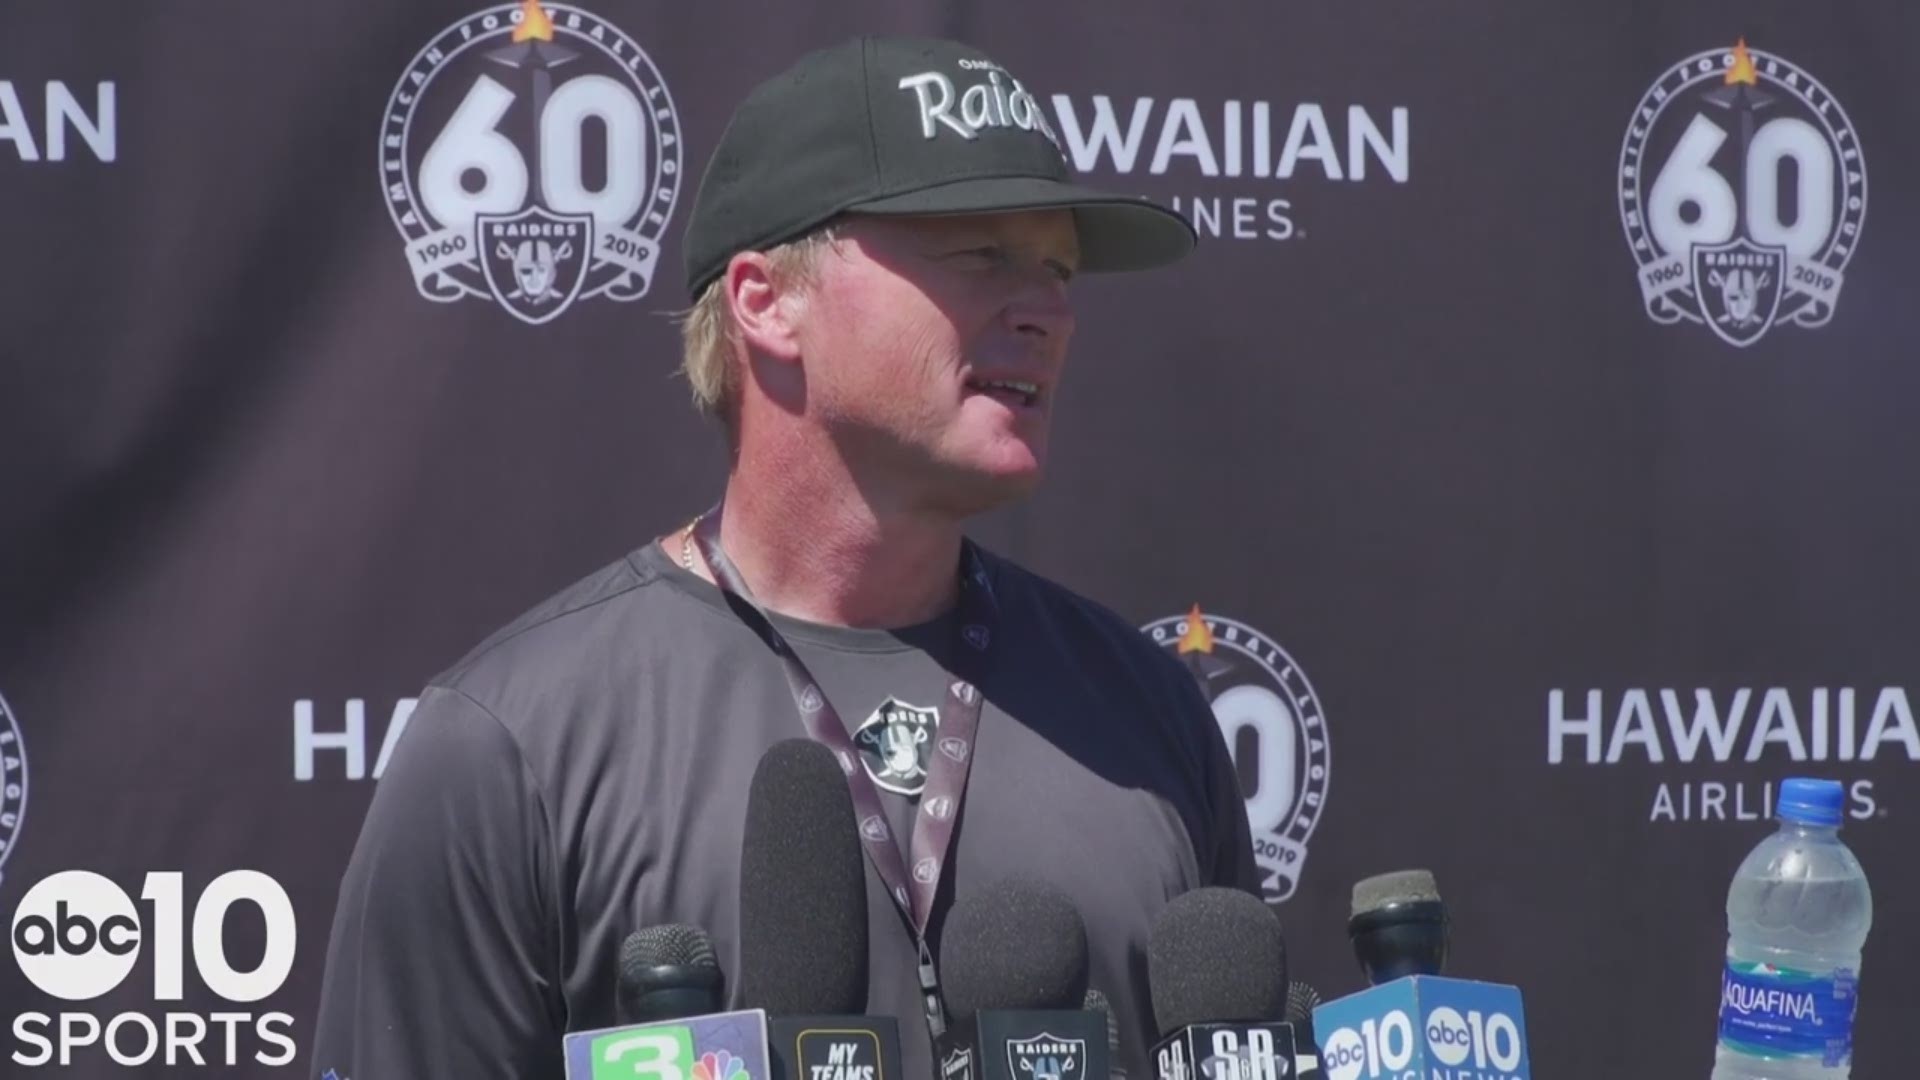 Following Friday's training camp session in Napa, Raiders head coach Jon Gruden voices his disappointment with having Antonio Brown out with injury, talks about the improvements in Kolton Miller's second season with Oakland and the addition of Jonathan Cooper.